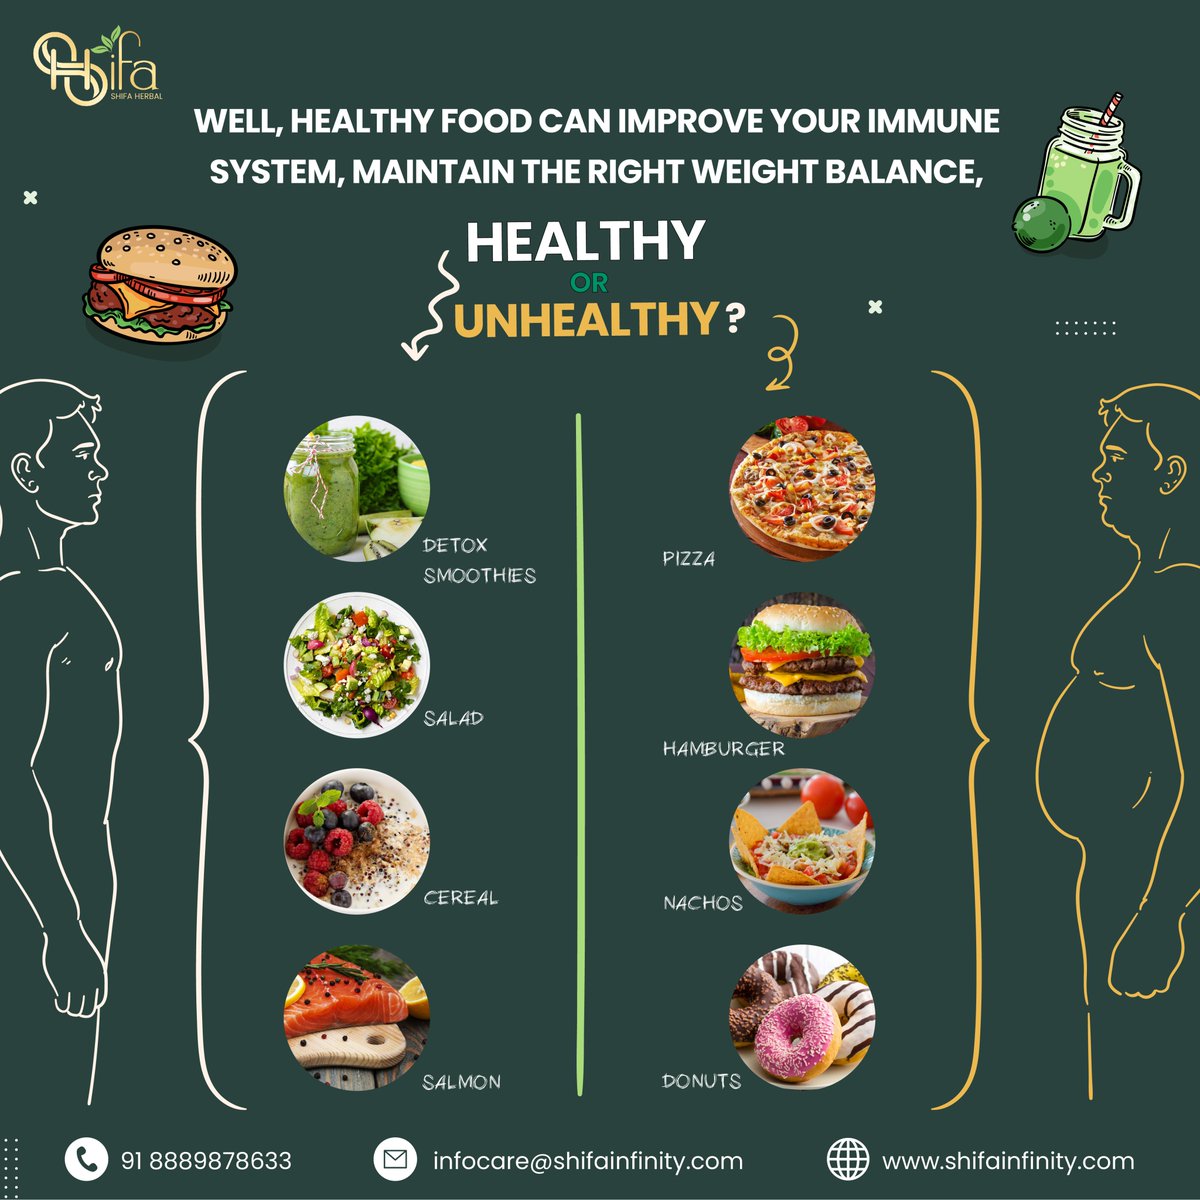 Discover the Long-Lost Secrets to Your Health

Follow Us:- @hakimsadiq52

You can consult online Contact us at - (+91)8889878633
.
.
#HealthyEating #ImmuneBoost #WeightBalance #HomeRemedies #HakimiShifaKhana #NutritionMatters #Nutrition #HealthyFood #EatWell #Healthyliving